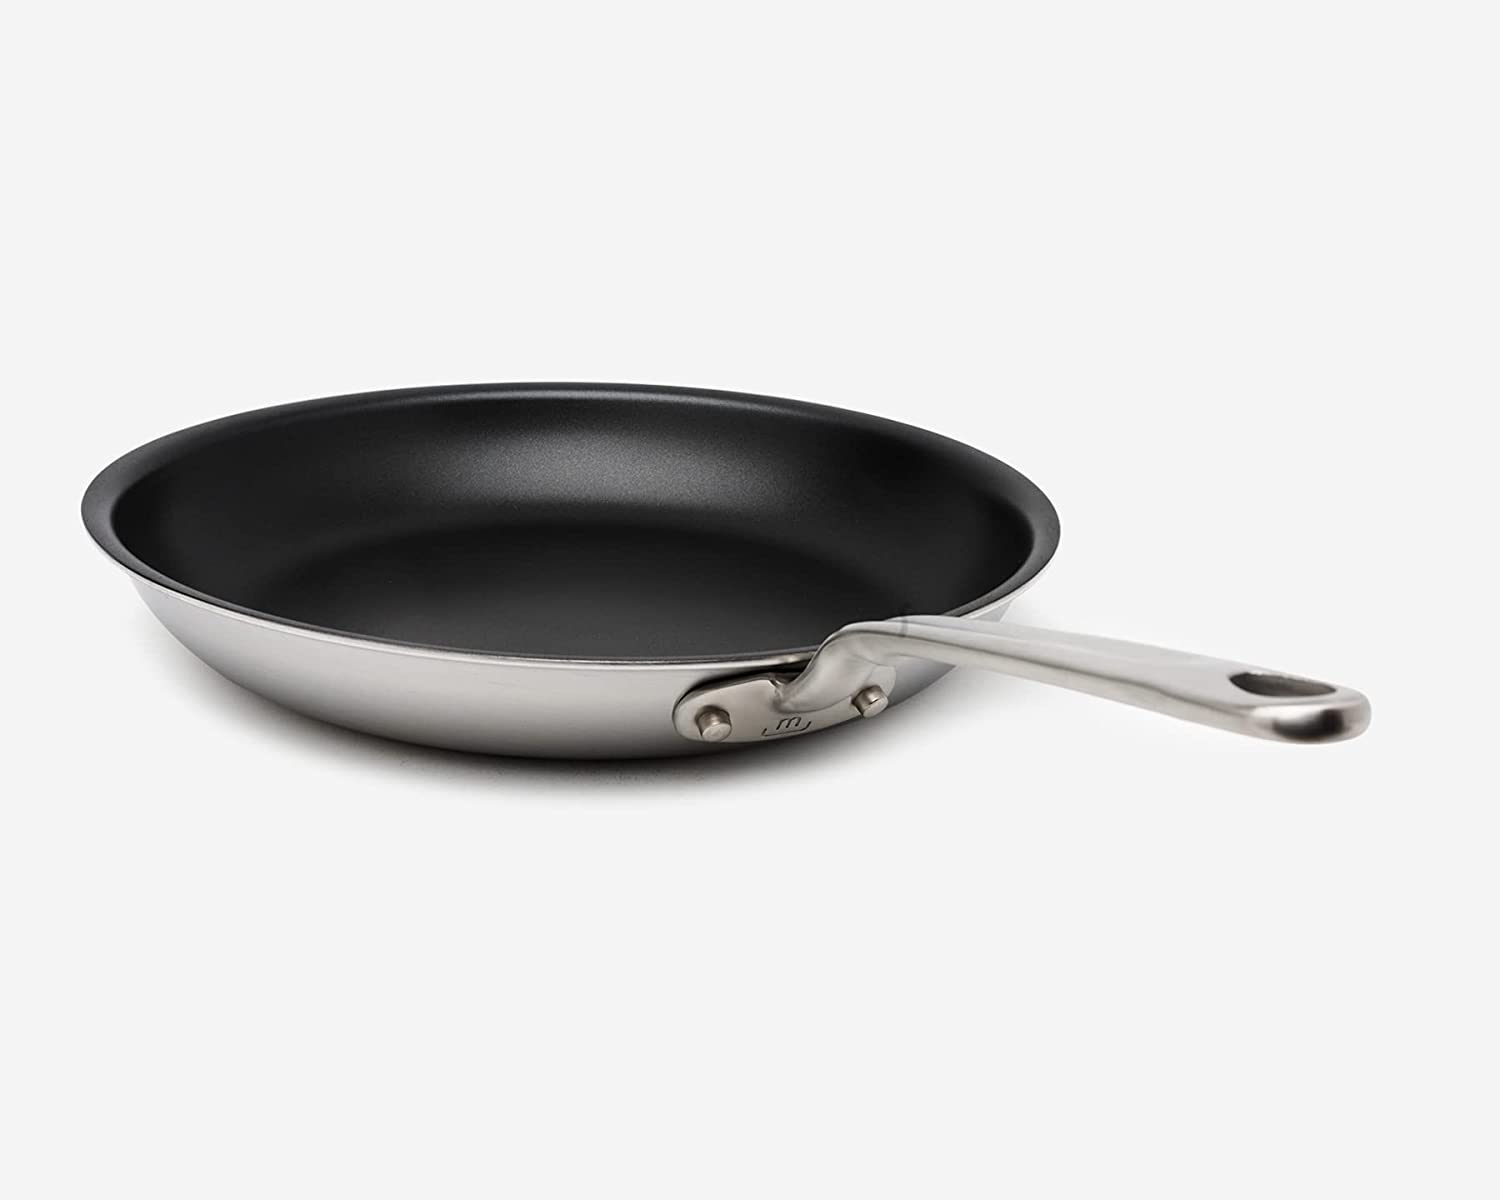 Unbiased Belgique Cookware Review: Our Experience